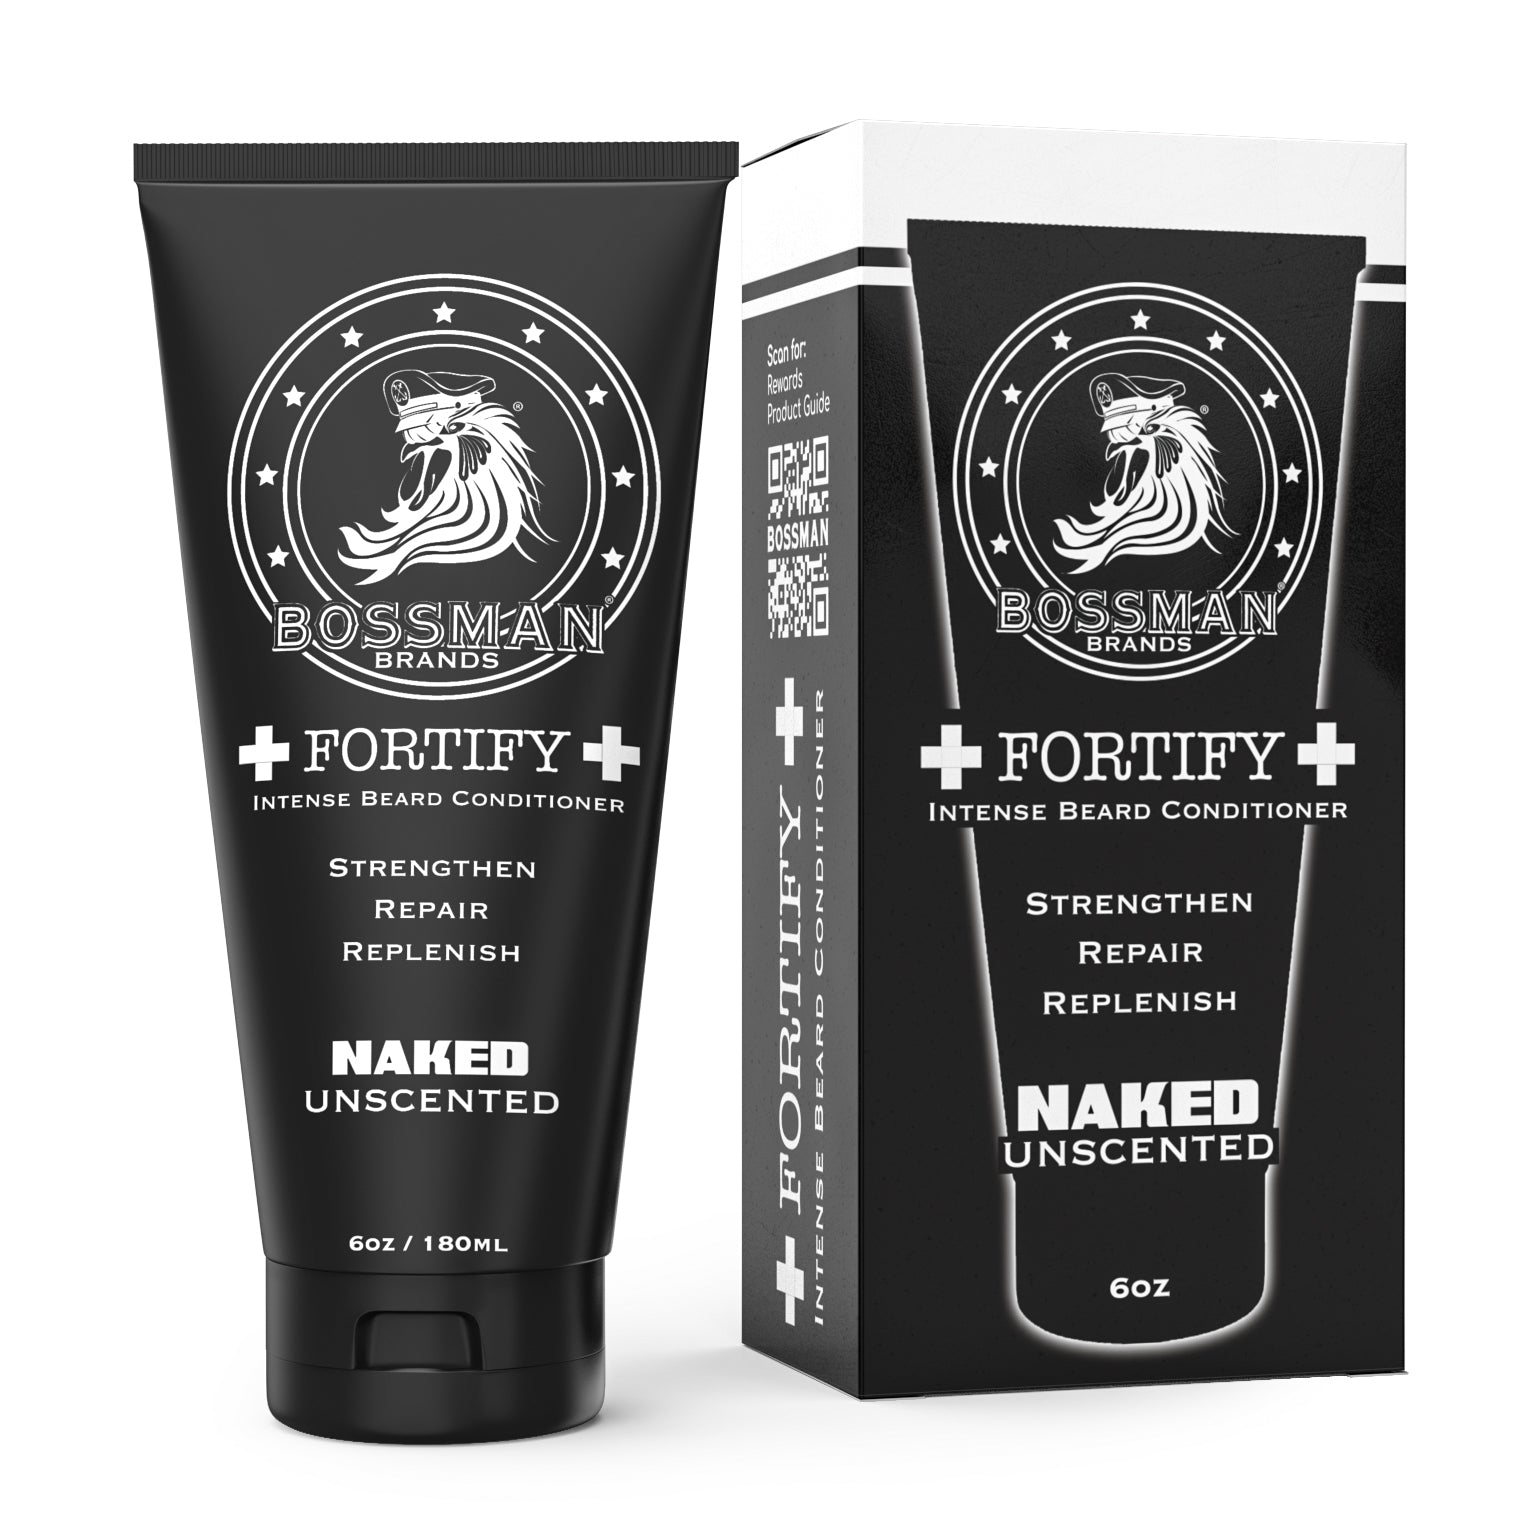 Fortify Intense Beard Conditioner - The Top Rated Beard Conditioner for Men